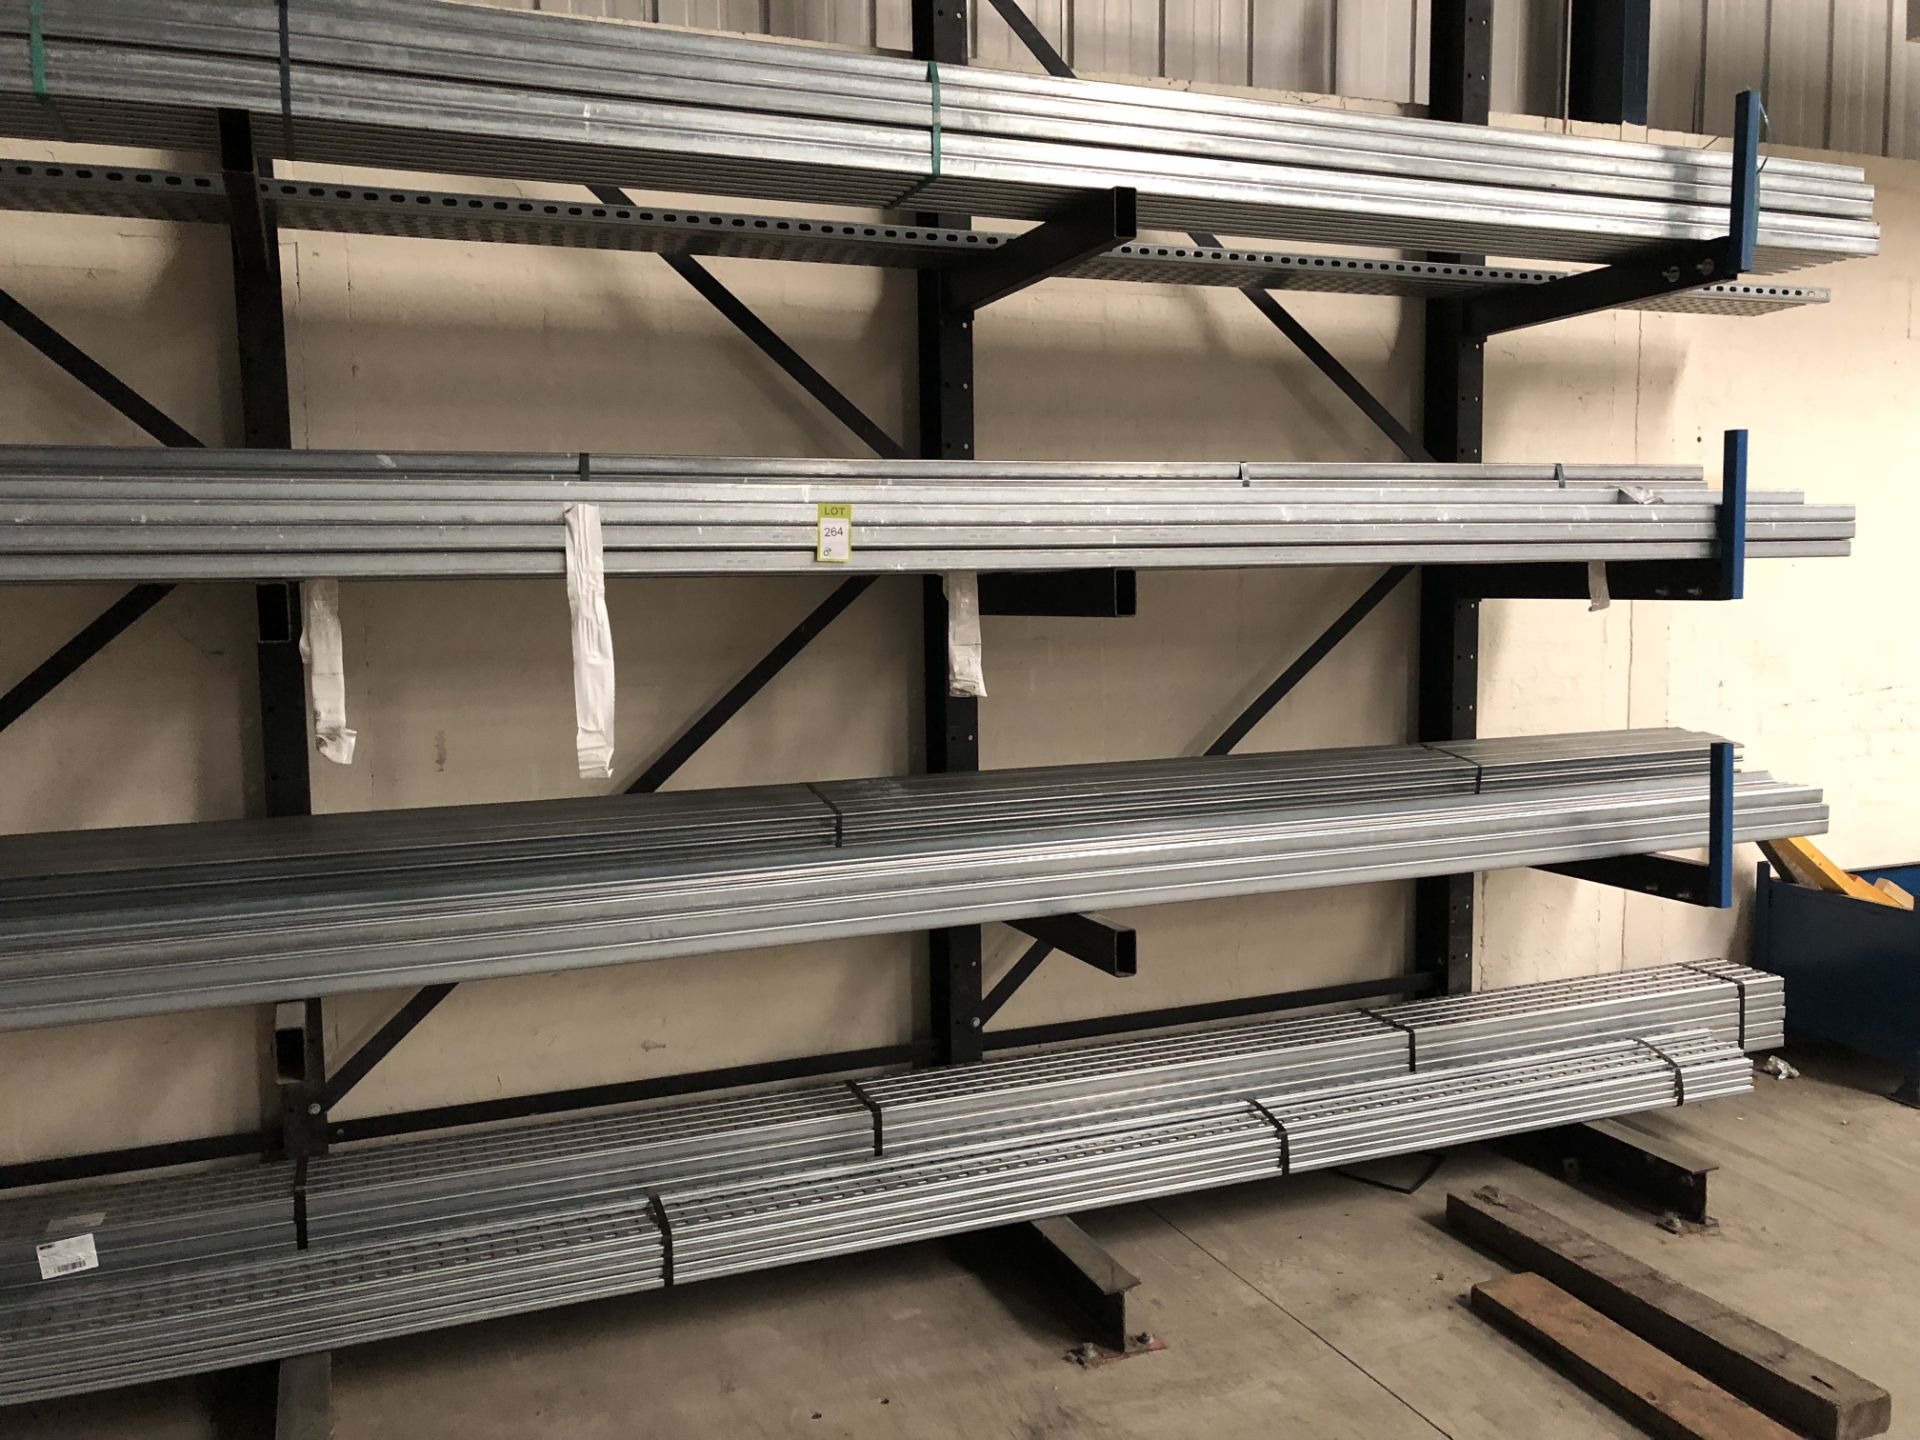 Quantity steel Cable Management Channel/Conduit, to stock rack (located in Bay 4)